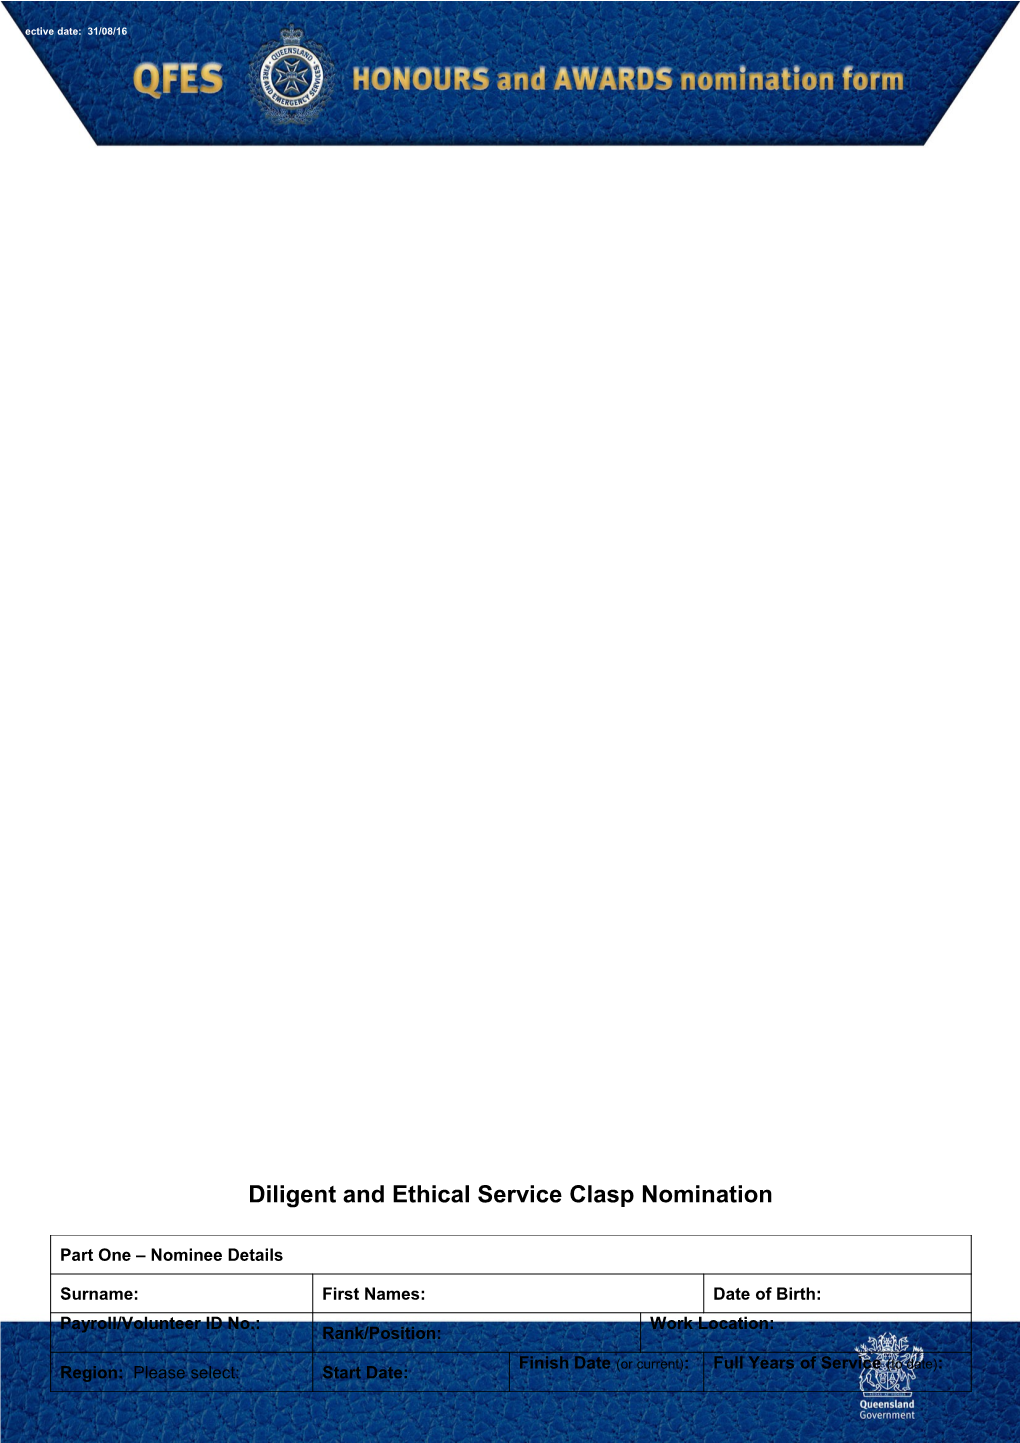 Diligent and Ethical Service Clasp Nomination Form